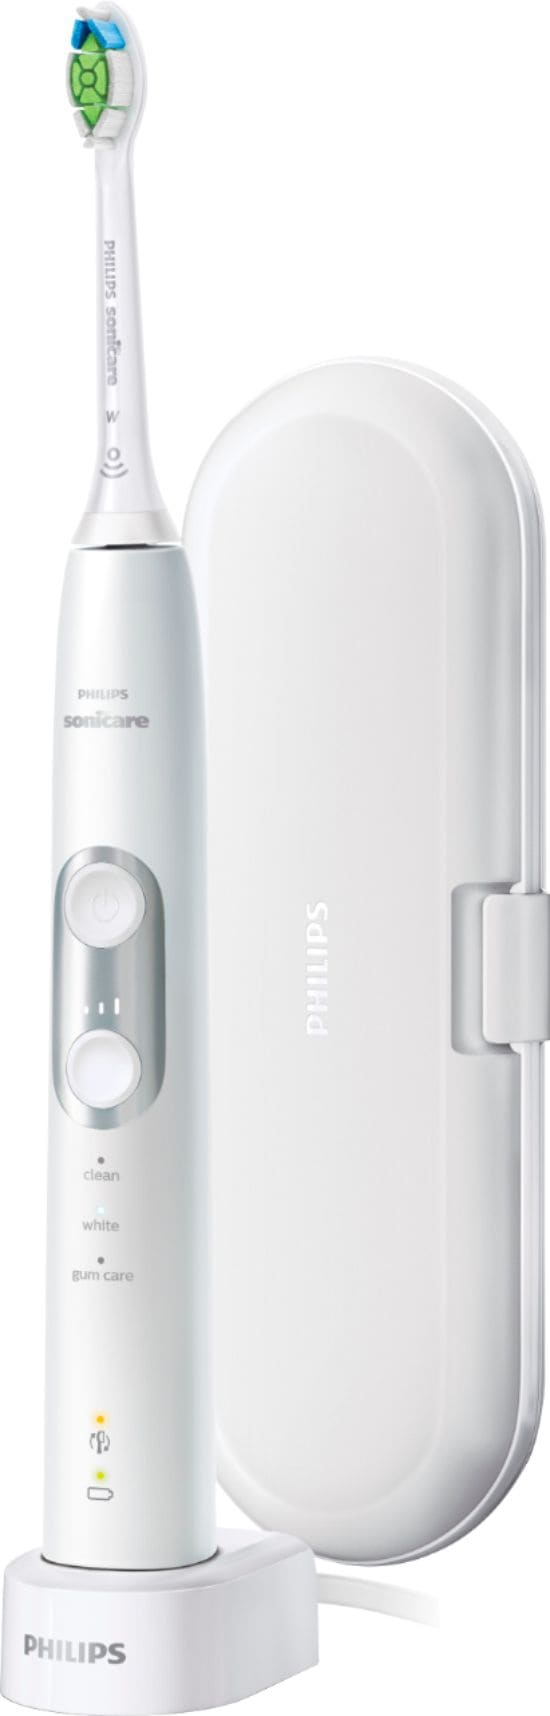 Philips Sonicare - ProtectiveClean 6100 Rechargeable Toothbrush - White_8